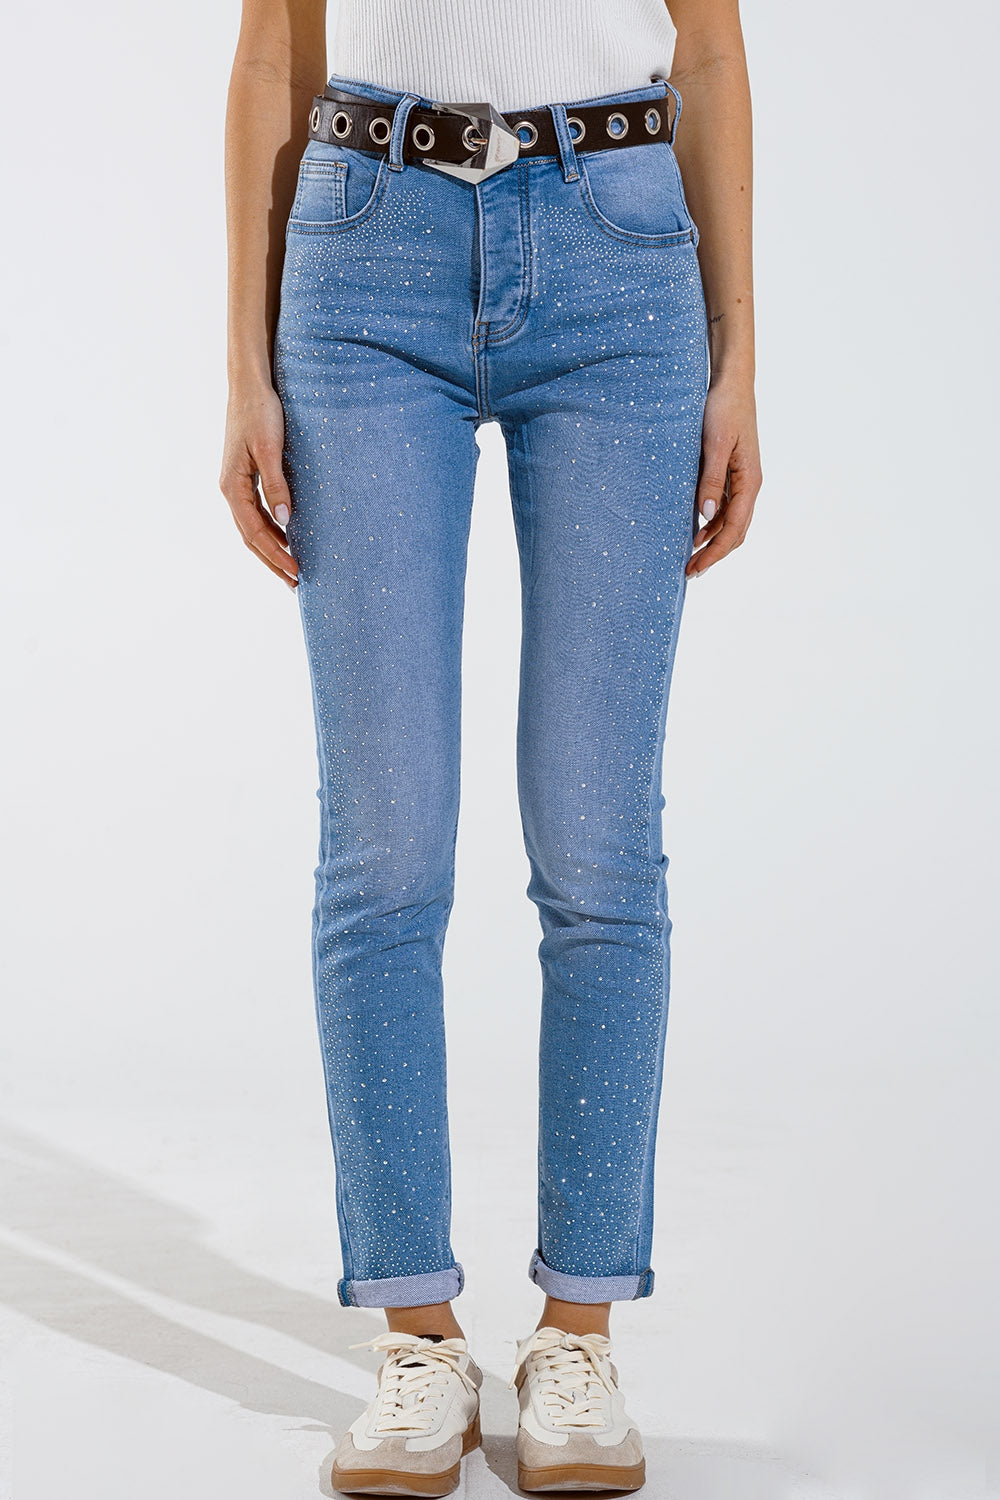 Q2 Skinny jeans in washed blue with strass all over the front